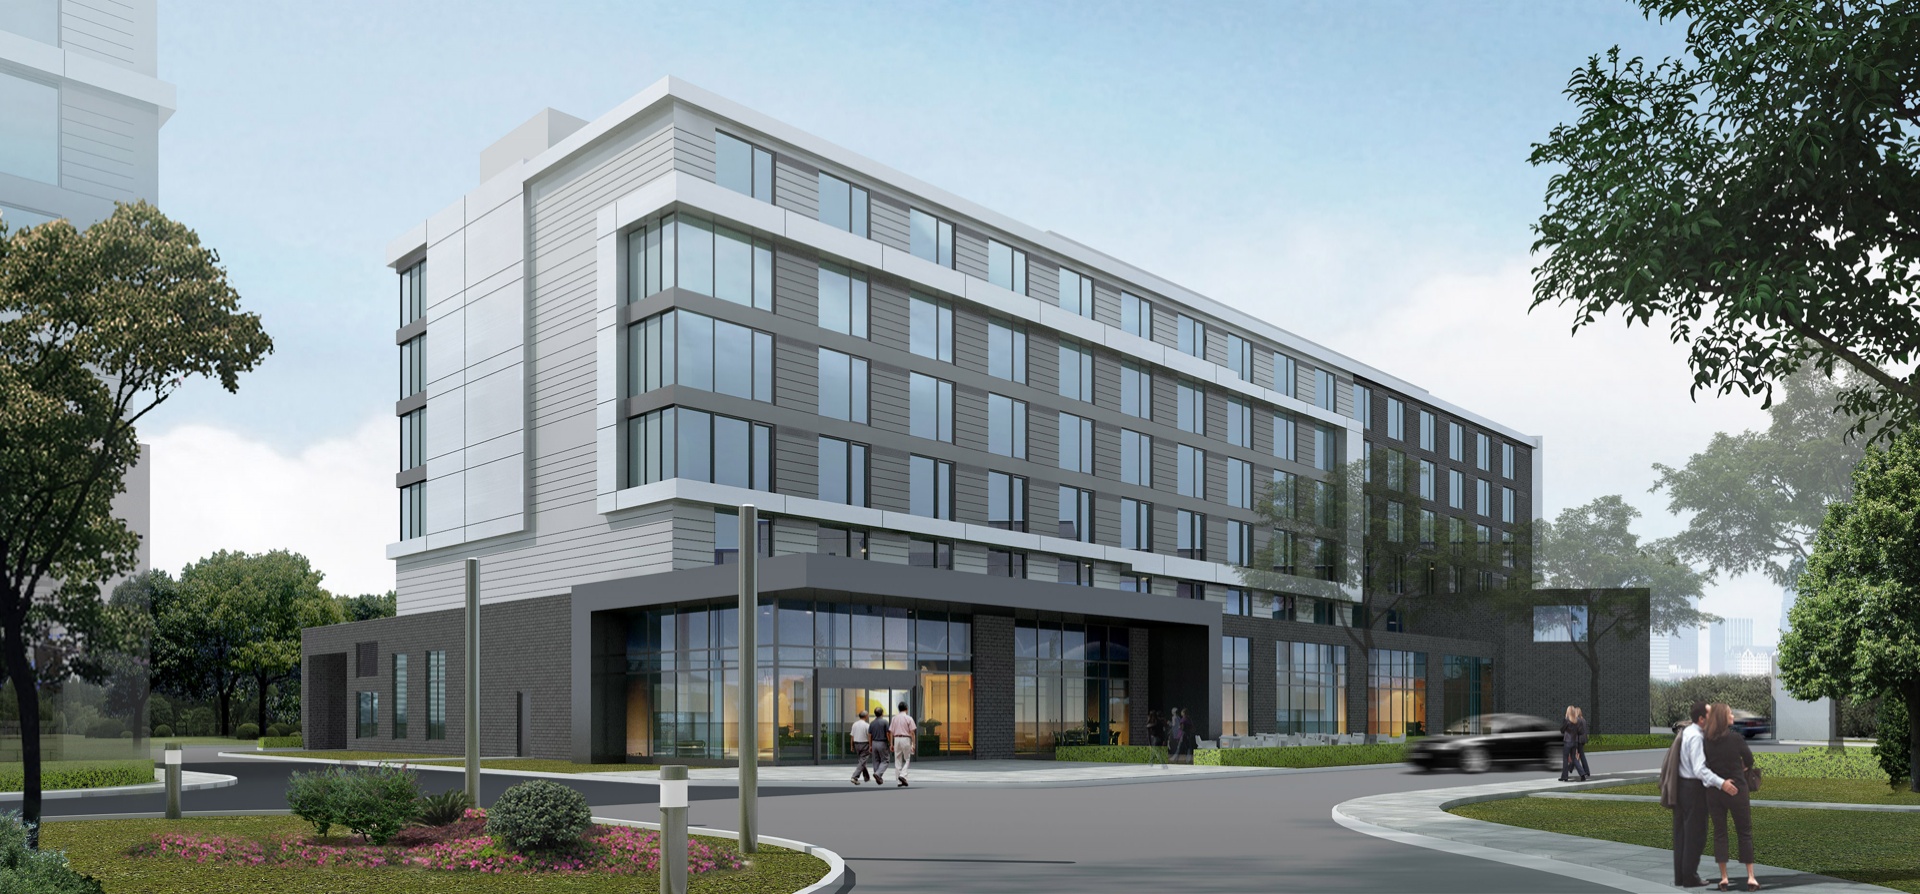 Holiday Inn Express + Staybridge | Architex Group | Montreal-based architectural design firm | Holiday Inn Express + Staybridge | Architectural design firm offering architectural project programming, architectural design & implementation based in Montreal.